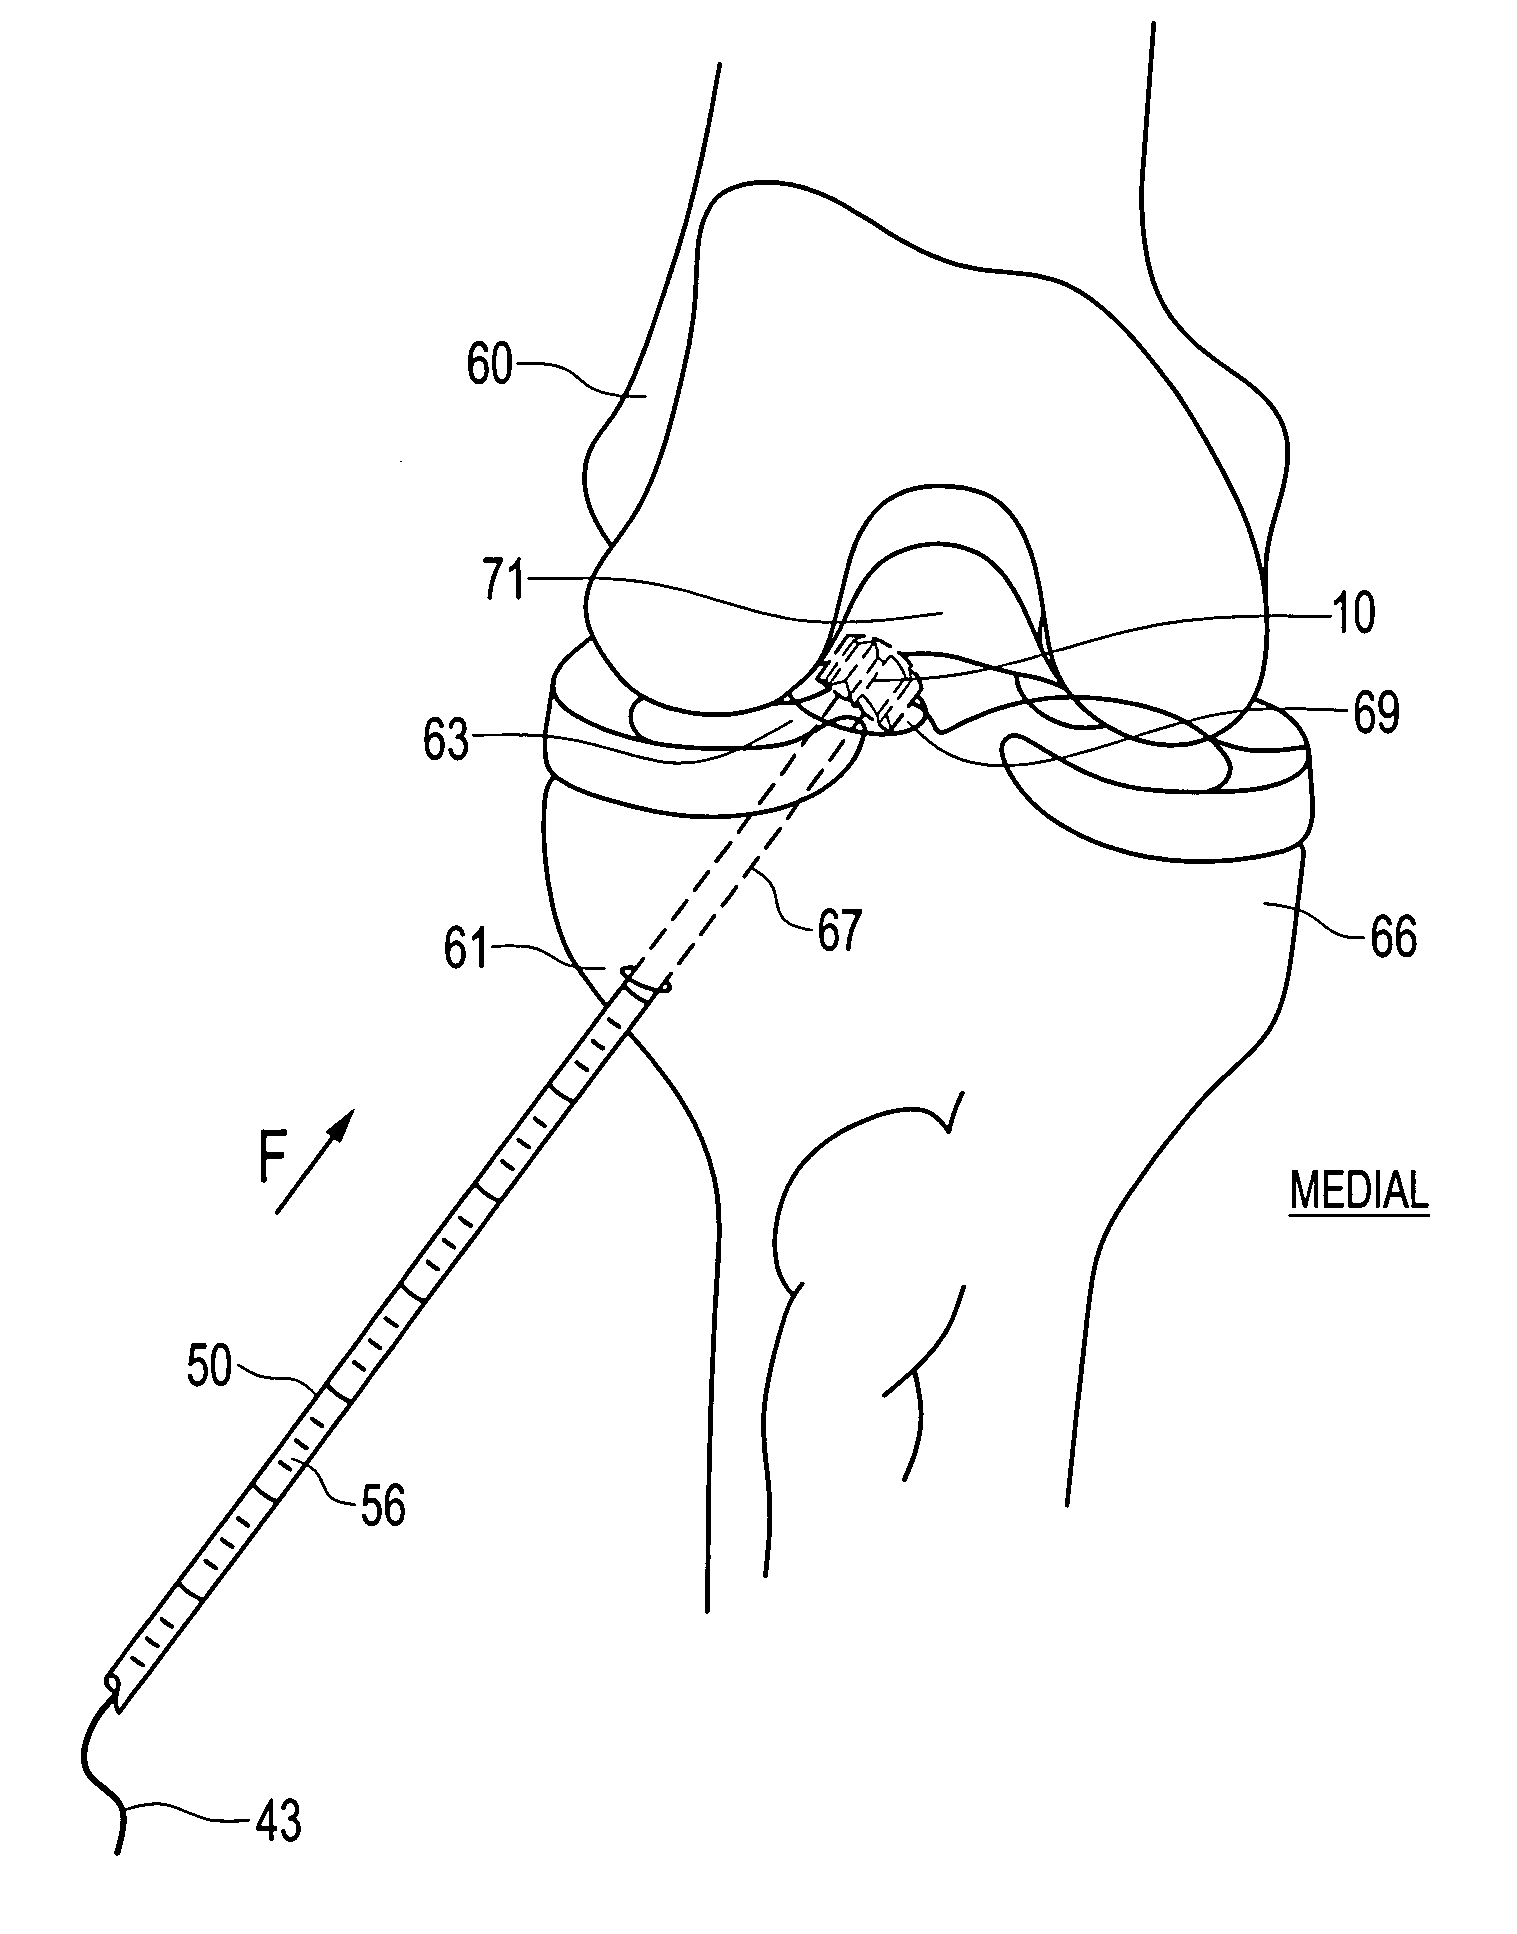 Retrodrill technique for insertion of autograft, allograft or synthetic osteochondral implants